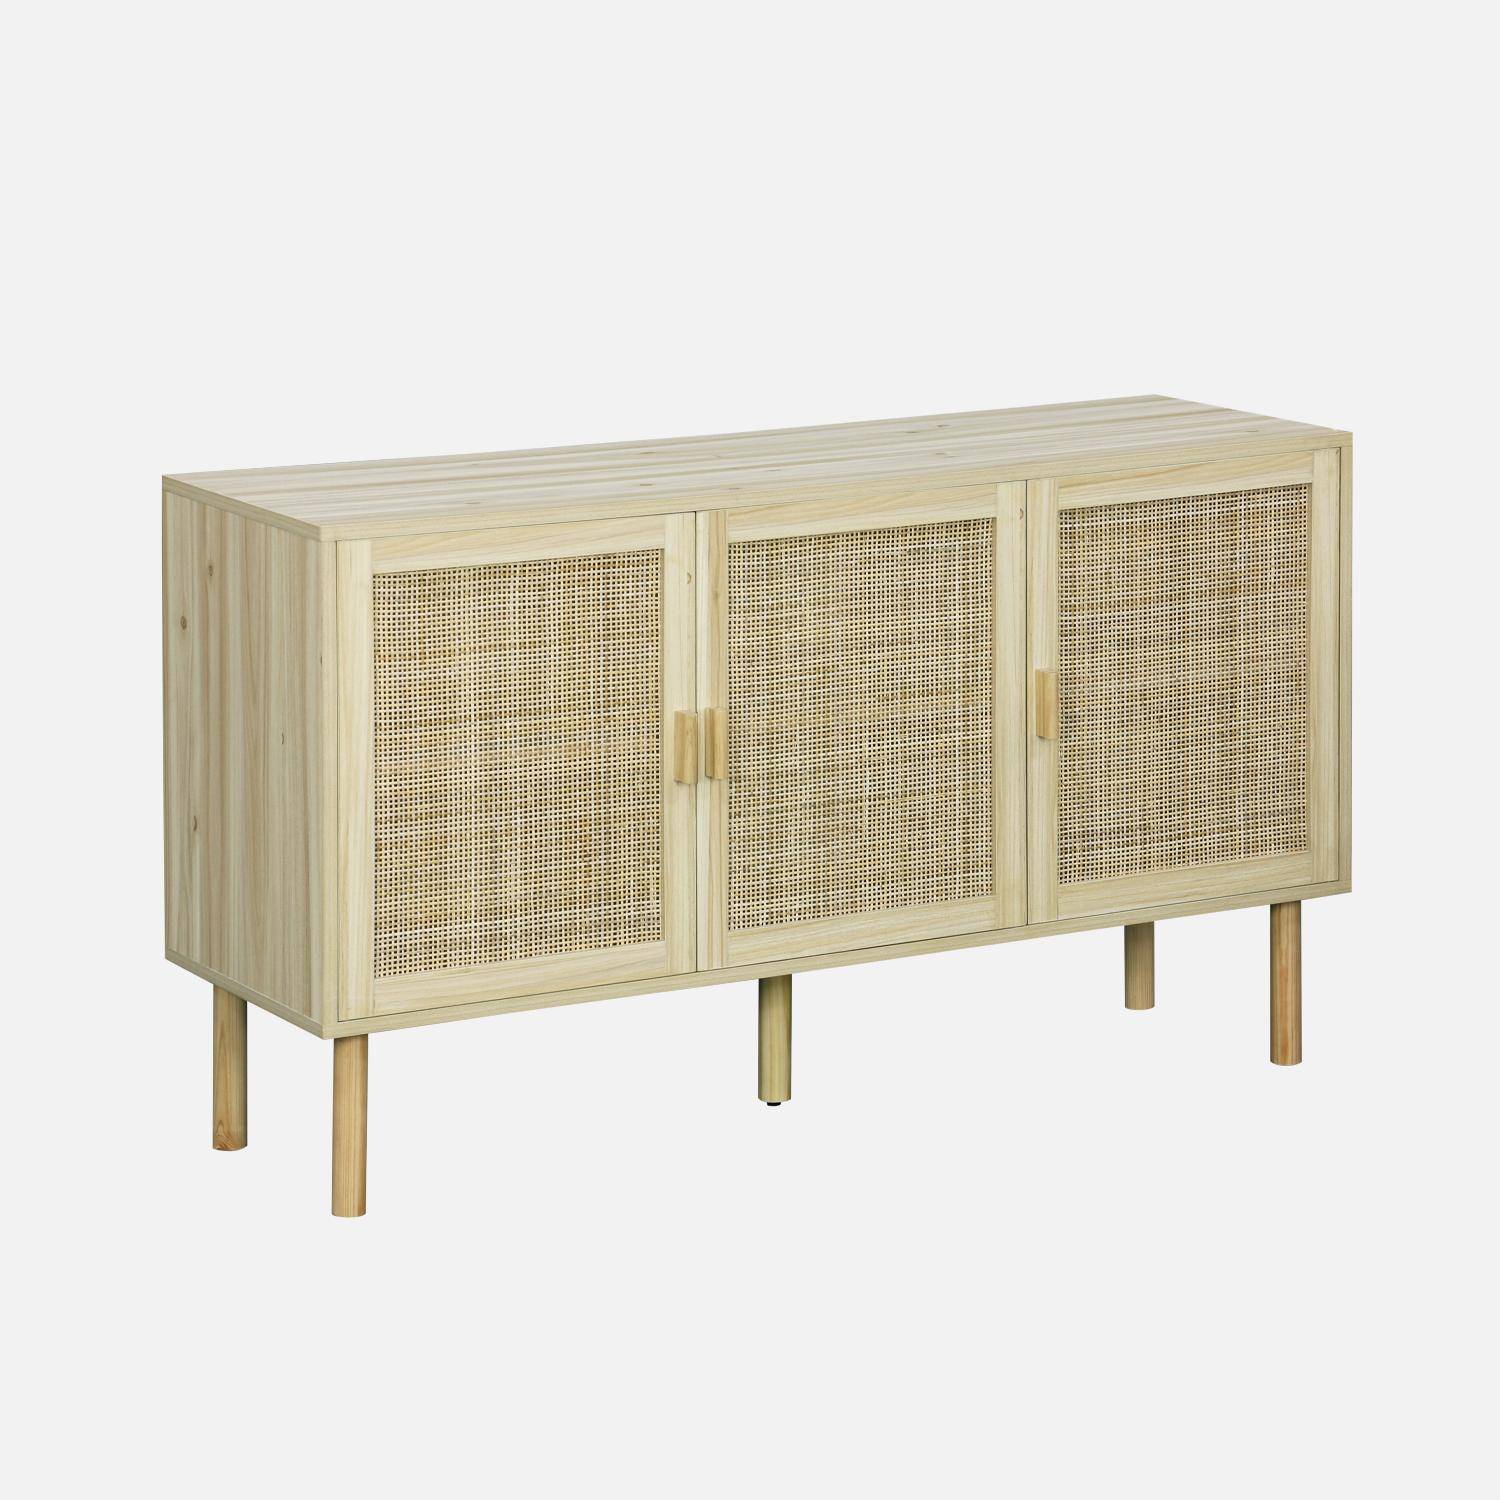 3-door sideboard with 3 shelves in cane and wood effect. Fir wood legs and handles. W 120 x D 39 x H 70cm CAMARGUE Photo1